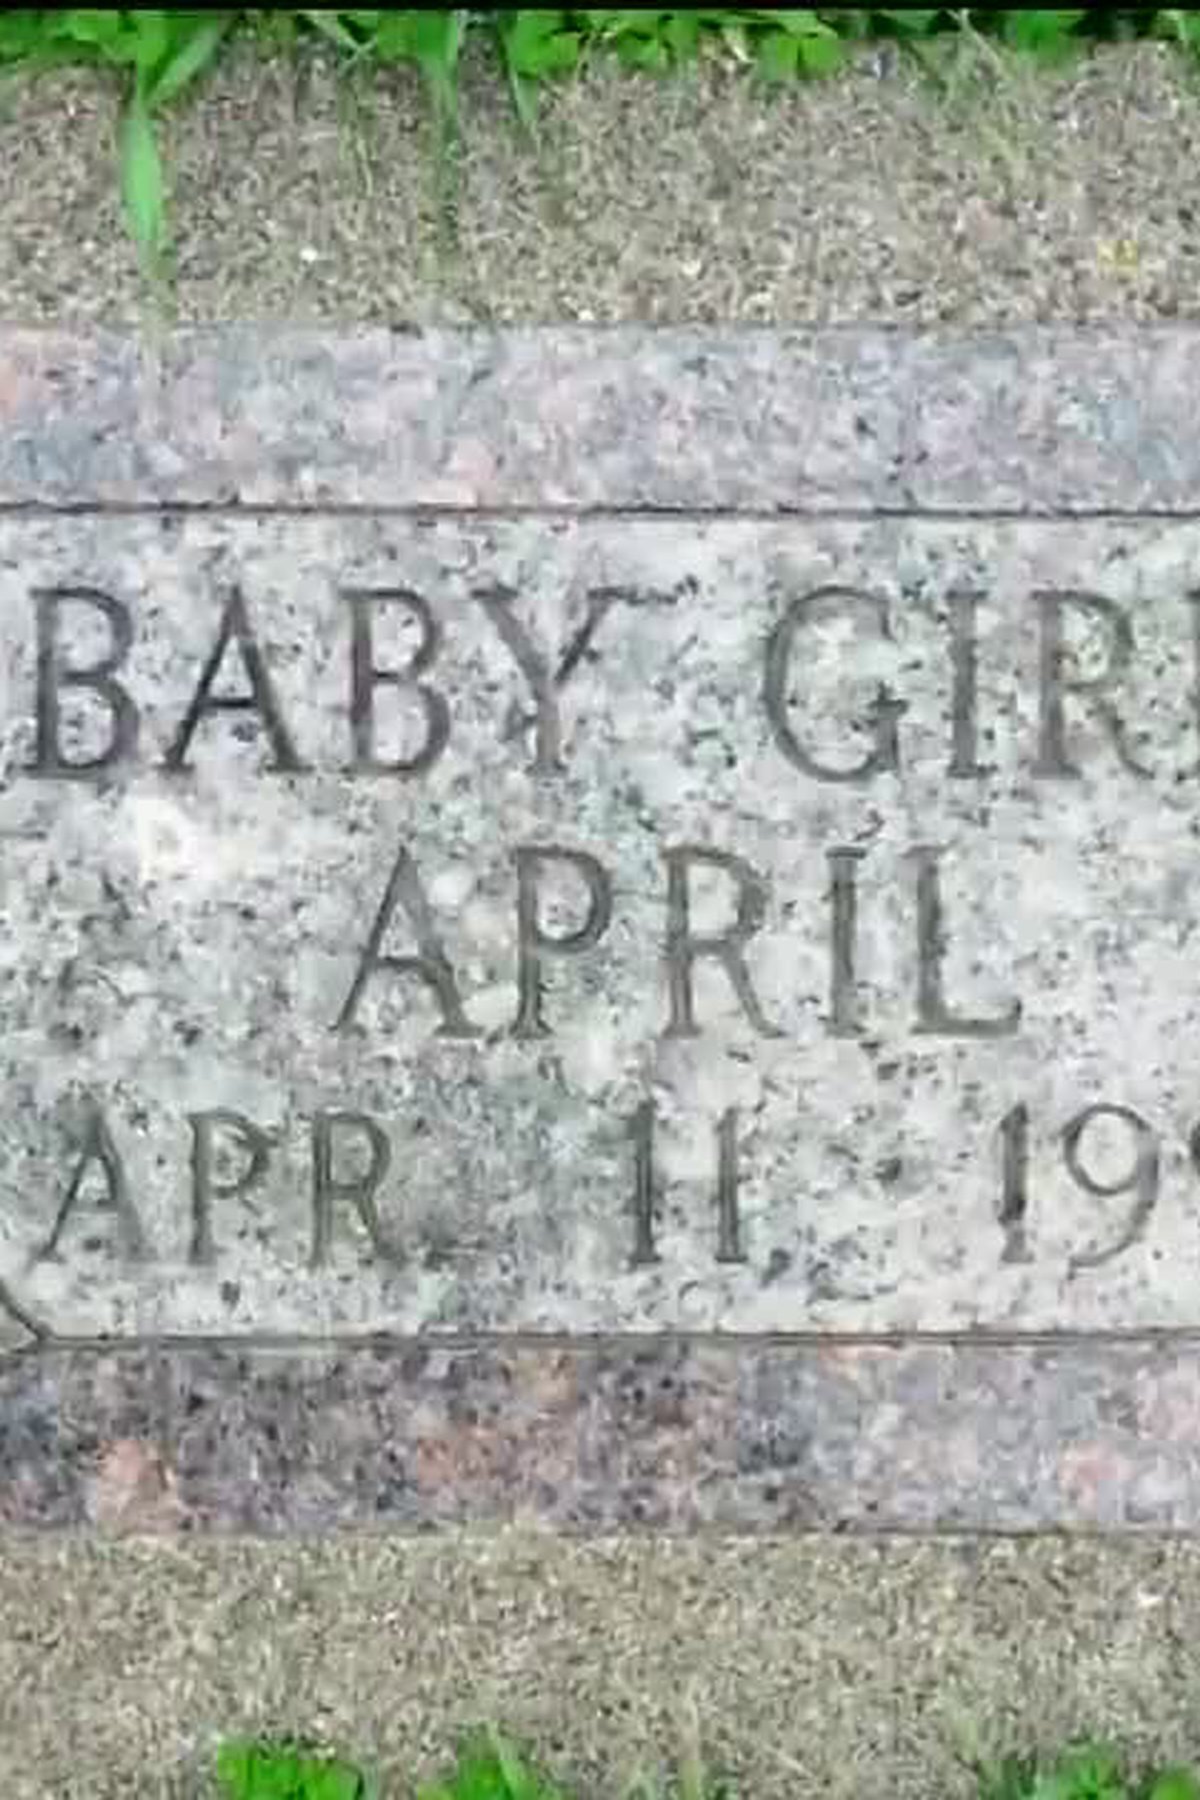 [IMAGE] Baby April's 28-year-old cold case solved with the help of genetic genealogy testing